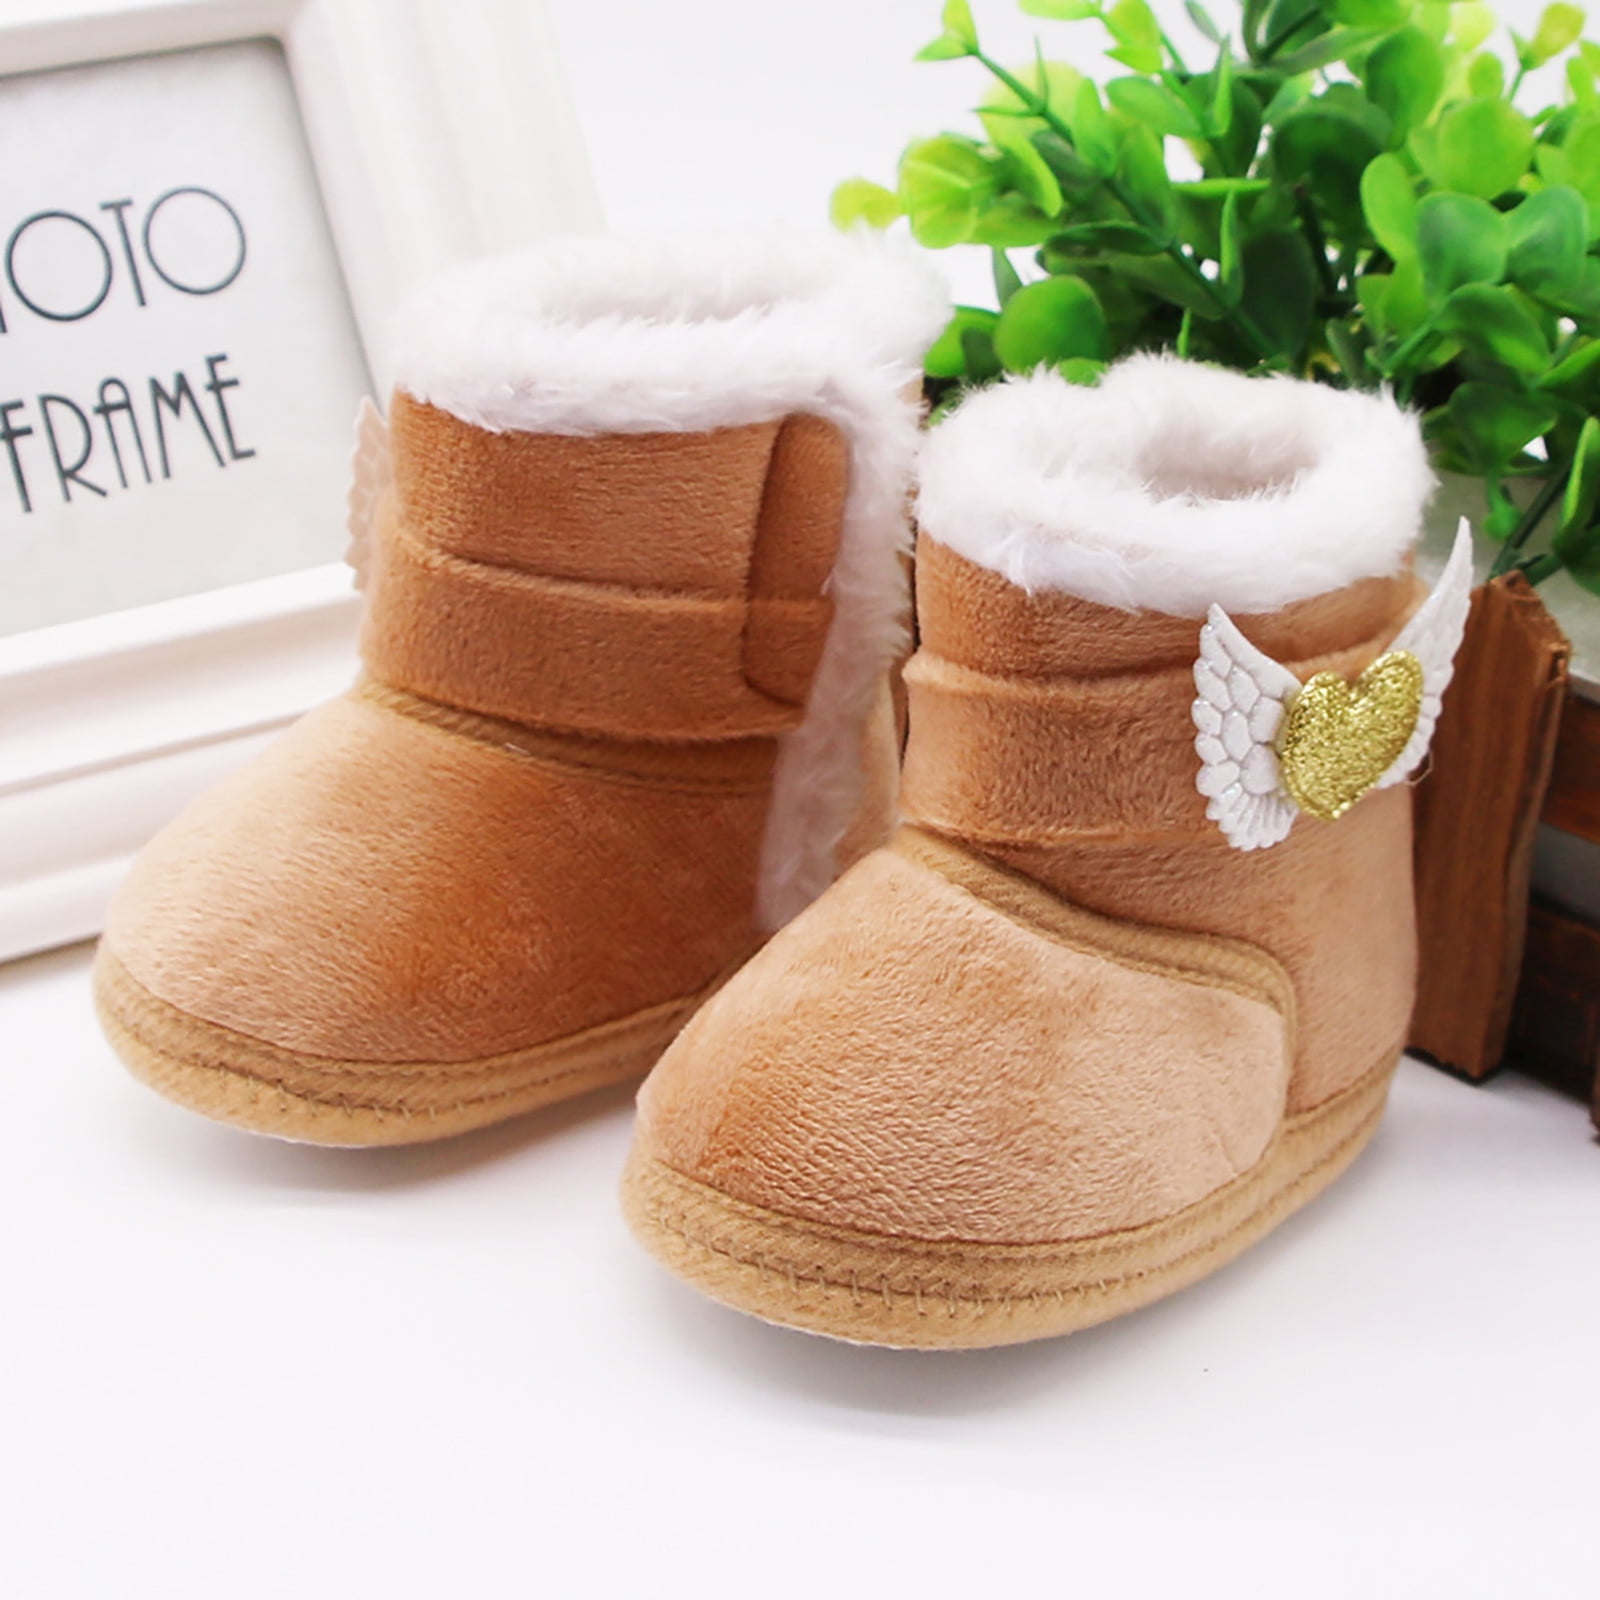 GAP Baby Toddler Boy Size 8 US 25 EU Brown Sherpa-Lined Boots Booties Shoes 